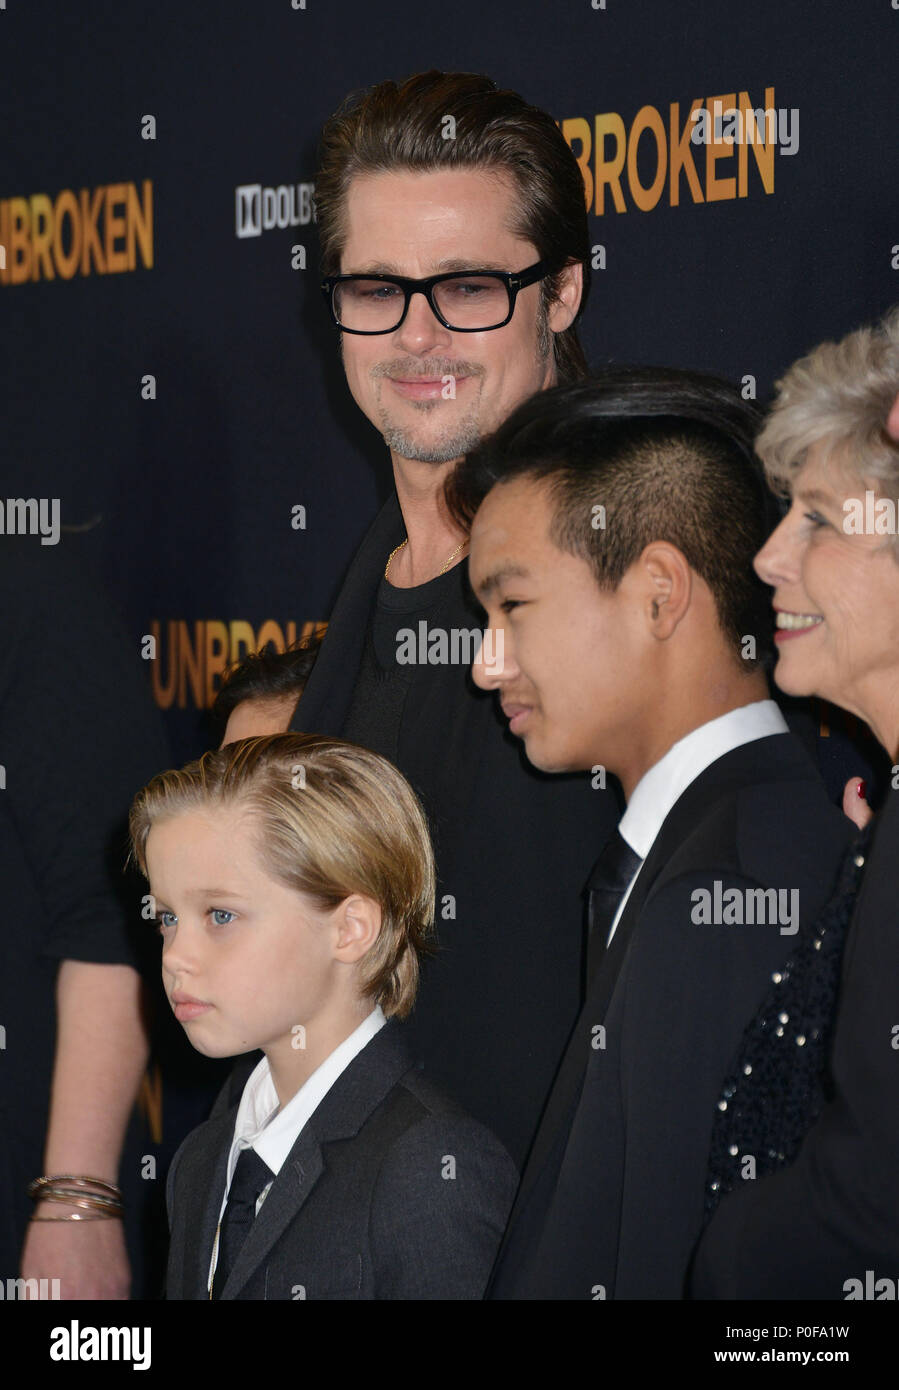 a Brad Pitt, (L-R) Pax Thien Jolie-Pitt, Shiloh Nouvel Jolie-Pitt,, Maddox Jolie-Pitt, Jane Pitt, and William Pitt 048a   at the Unbroken Premiere at the Dolby Theatre in Los Angeles. Dec. 14, 2014a Brad Pitt, (L-R) Pax Thien Jolie-Pitt, Shiloh Nouvel Jolie-Pitt,, Maddox Jolie-Pitt, Jane Pitt, and William Pitt 048a  ------------- Red Carpet Event, Vertical, USA, Film Industry, Celebrities,  Photography, Bestof, Arts Culture and Entertainment, Topix Celebrities fashion /  Vertical, Best of, Event in Hollywood Life - California,  Red Carpet and backstage, USA, Film Industry, Celebrities,  movie  Stock Photo